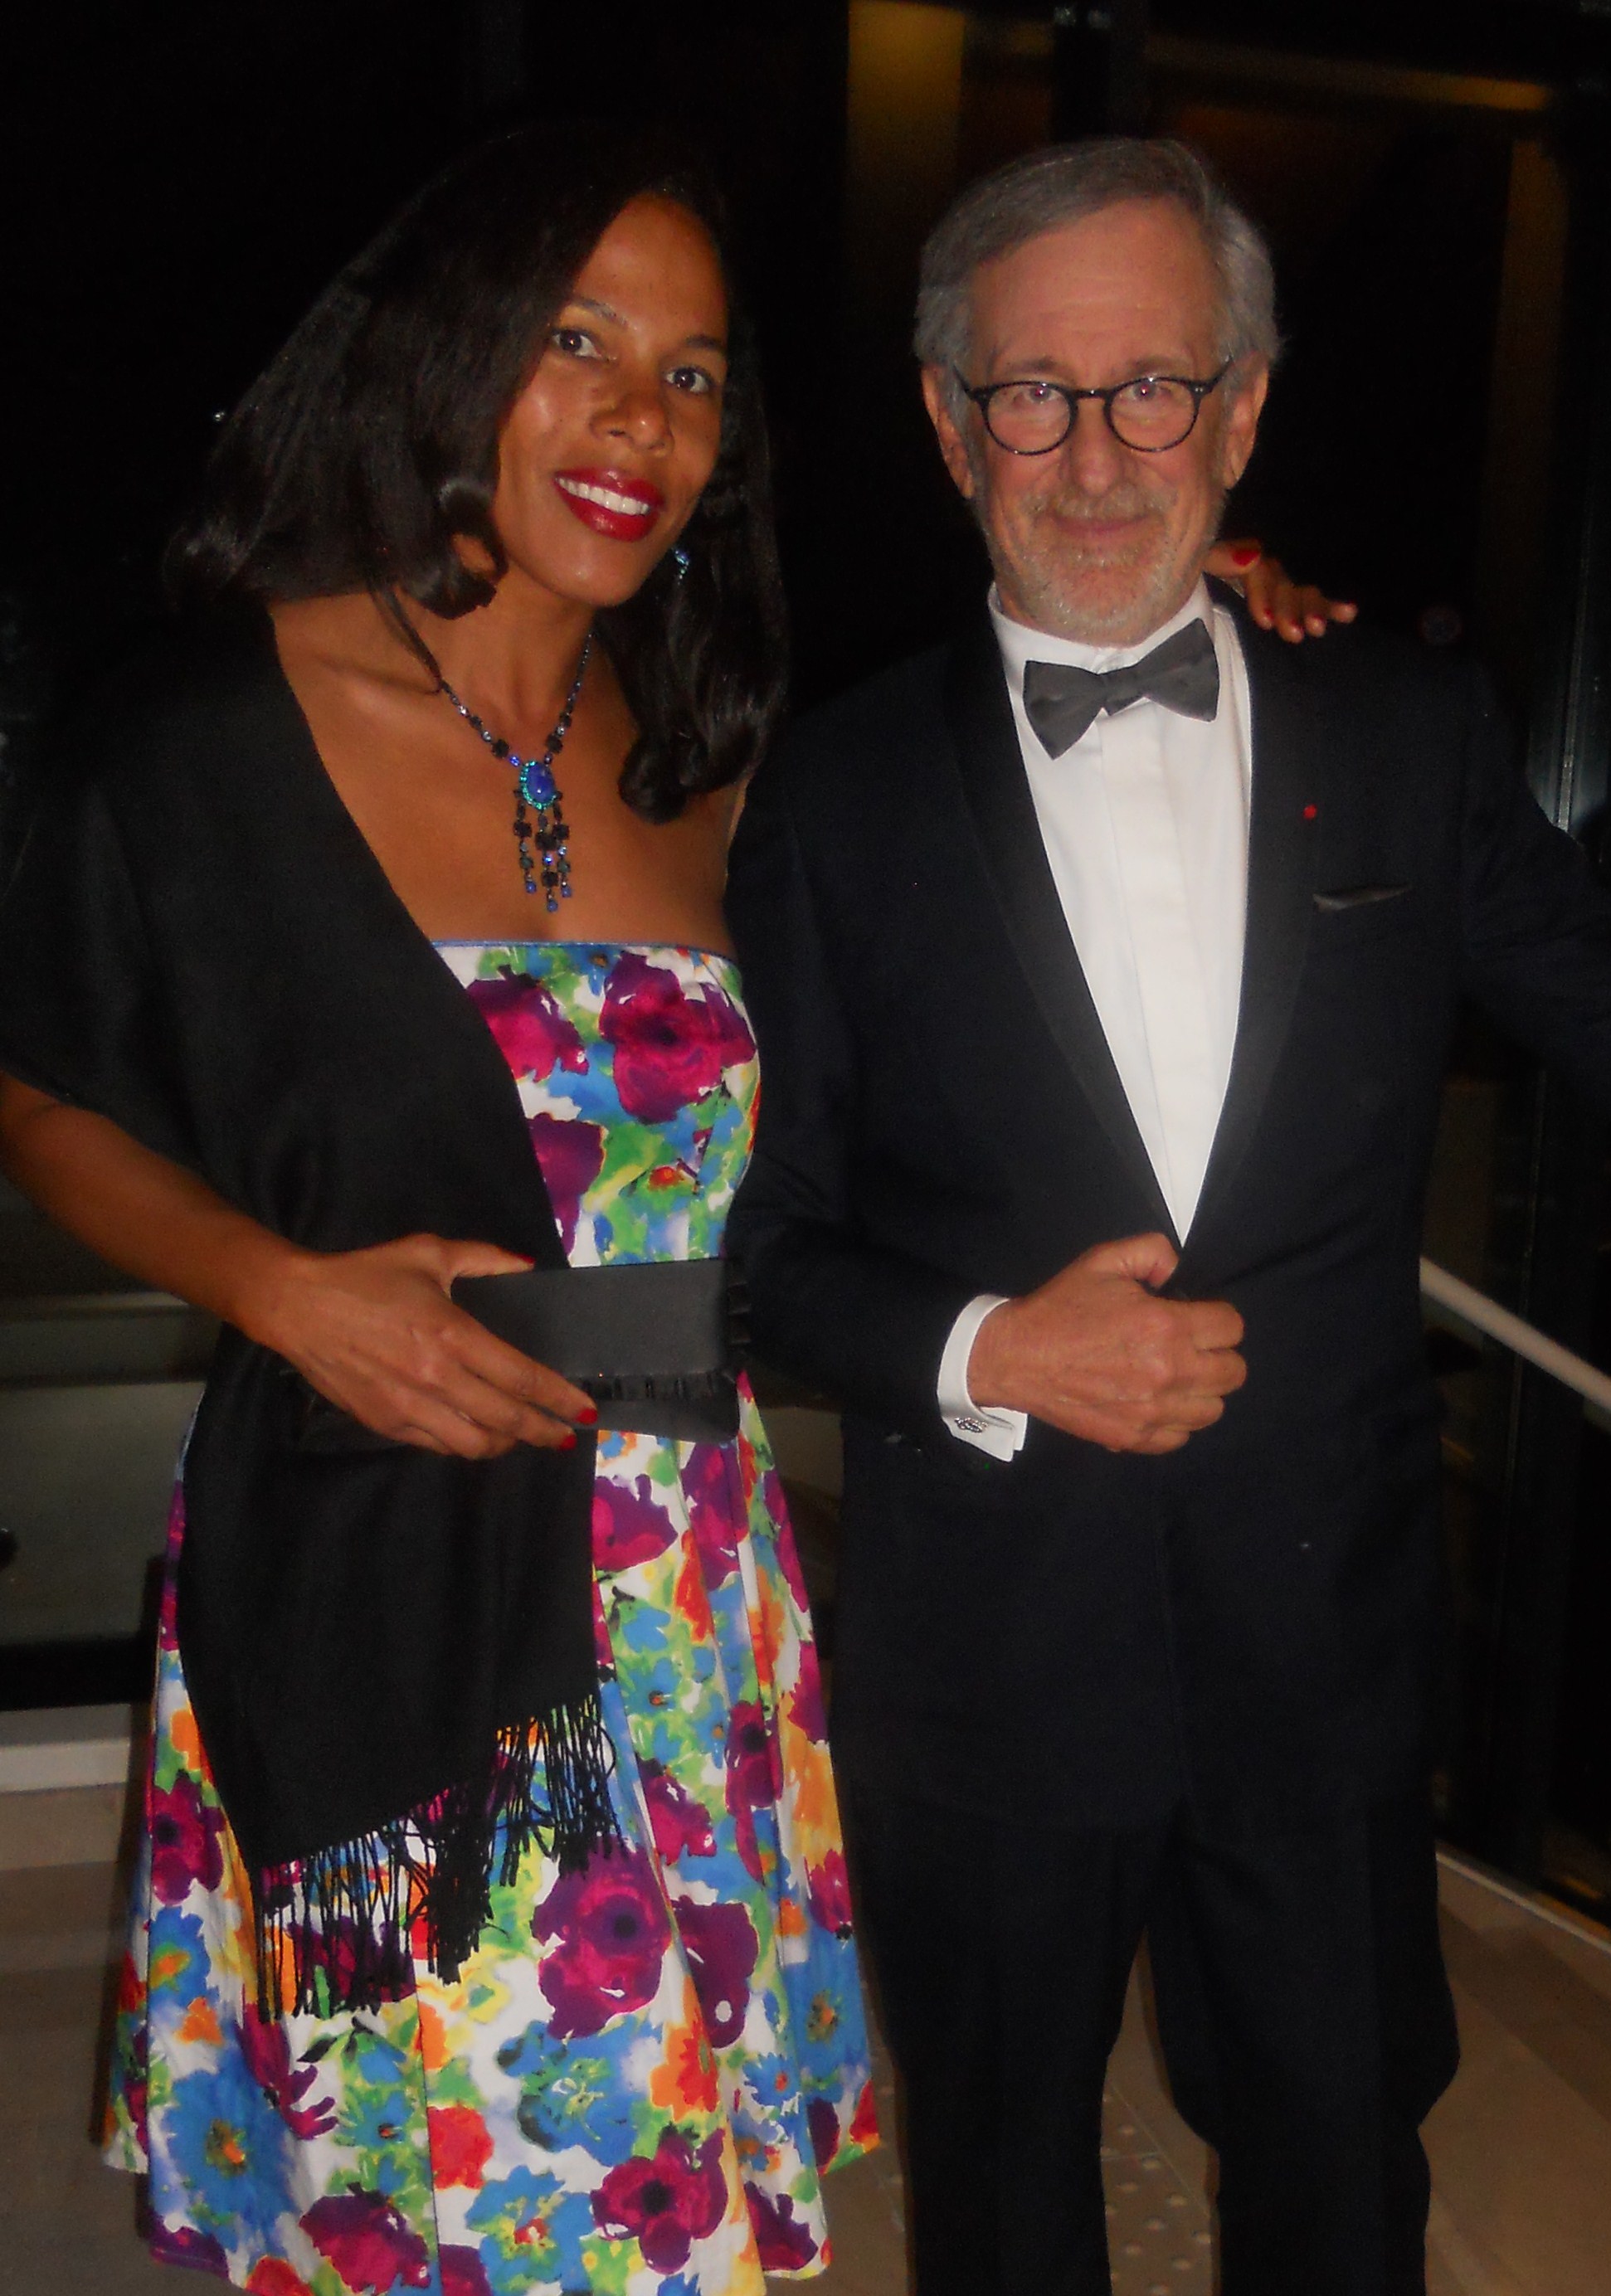 Steven Spielberg and Kira Madallo Sesay at the Palme d'Or Awards Ceremony in Cannes.